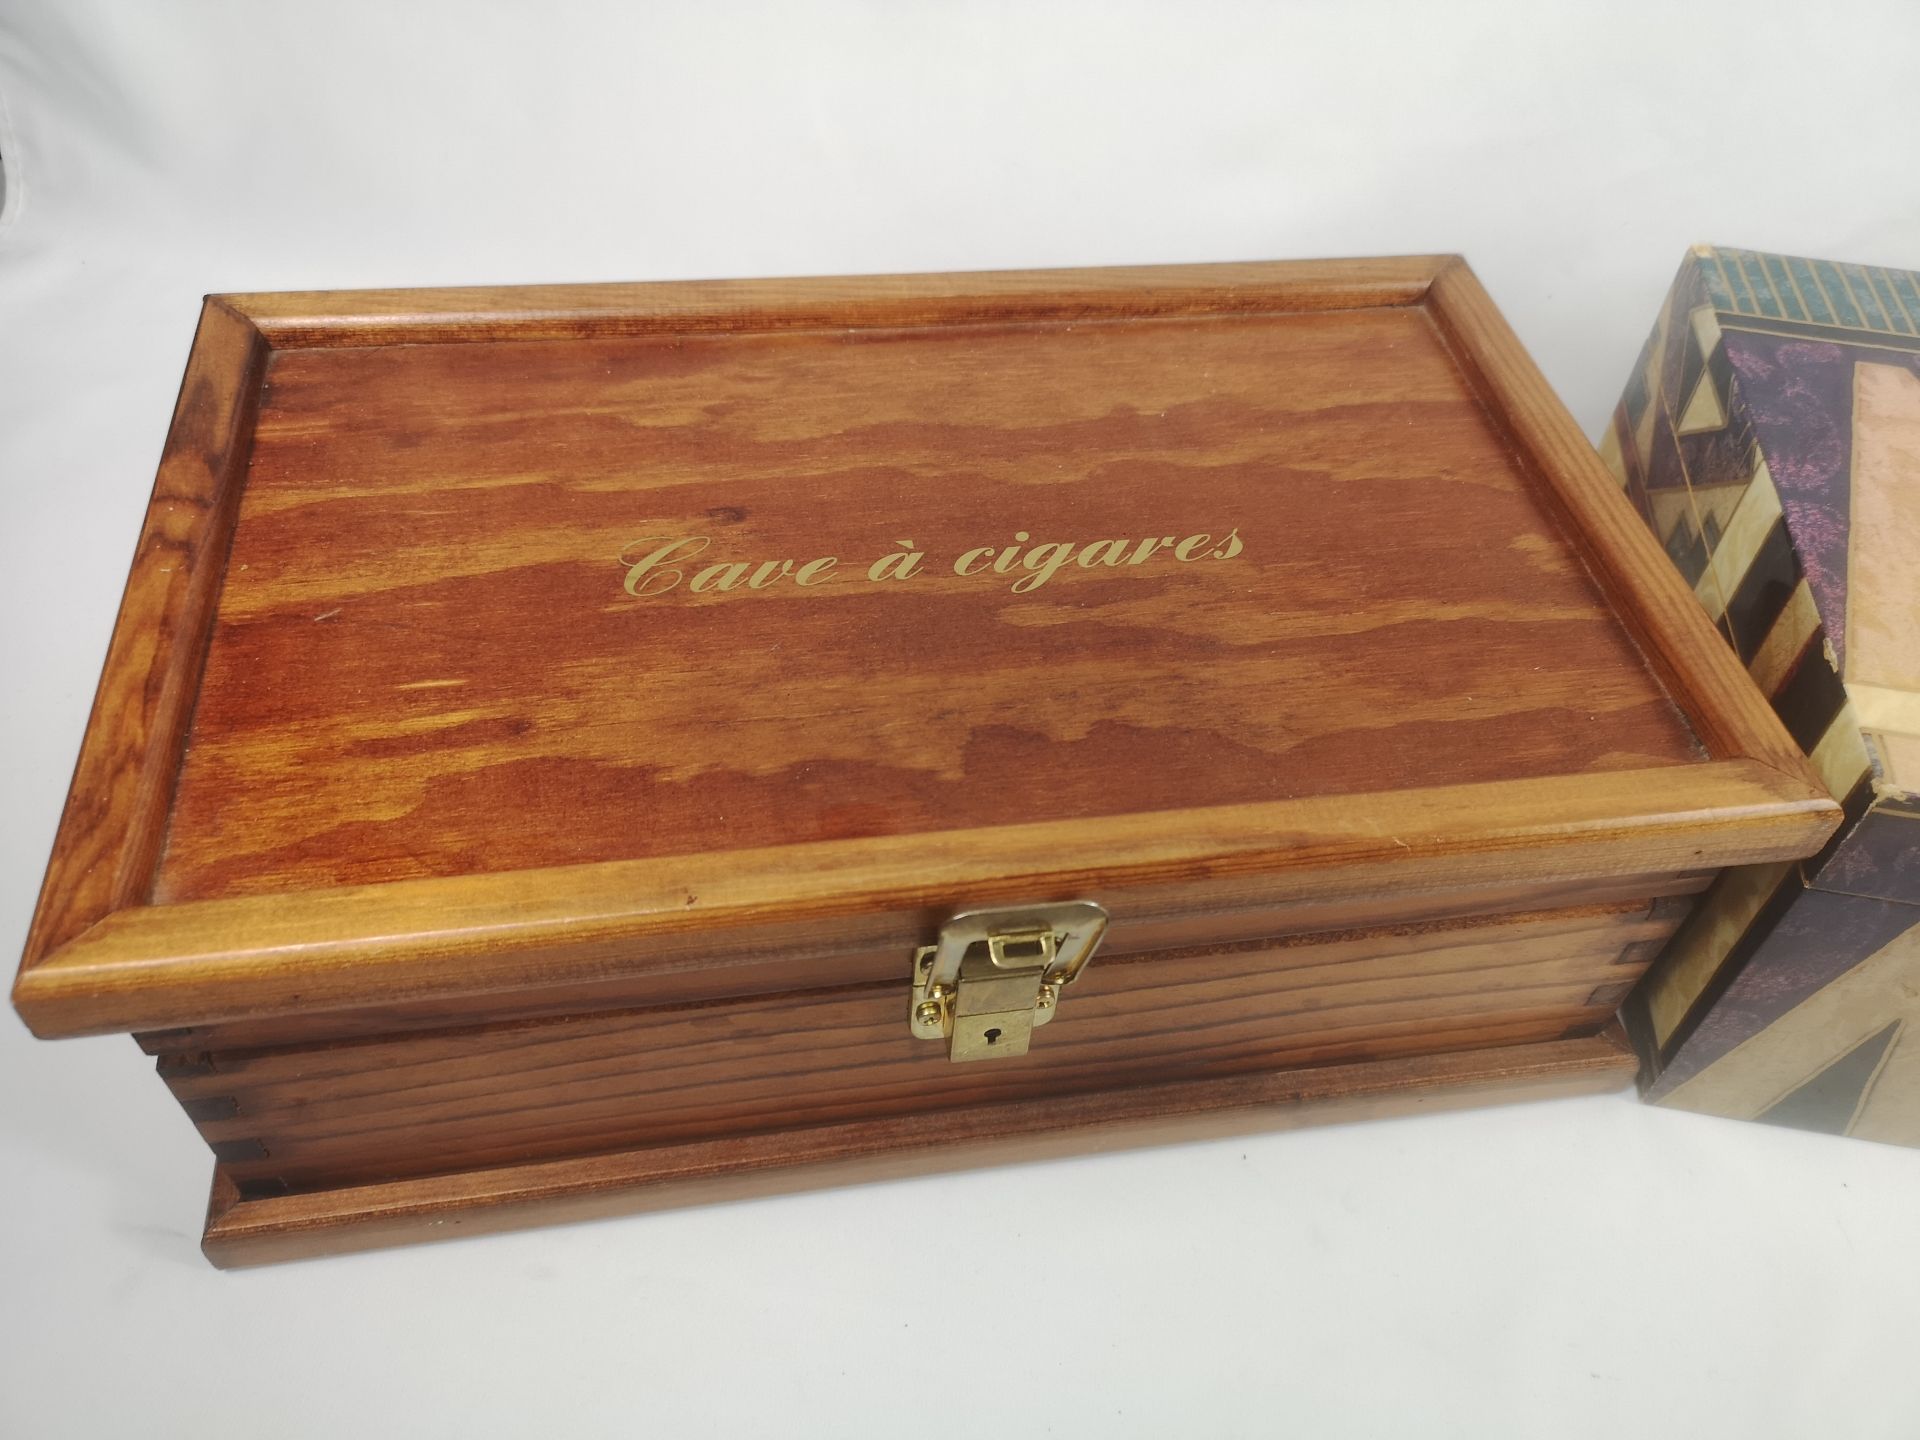 Three humidors and a quantity of cigars - Image 2 of 8